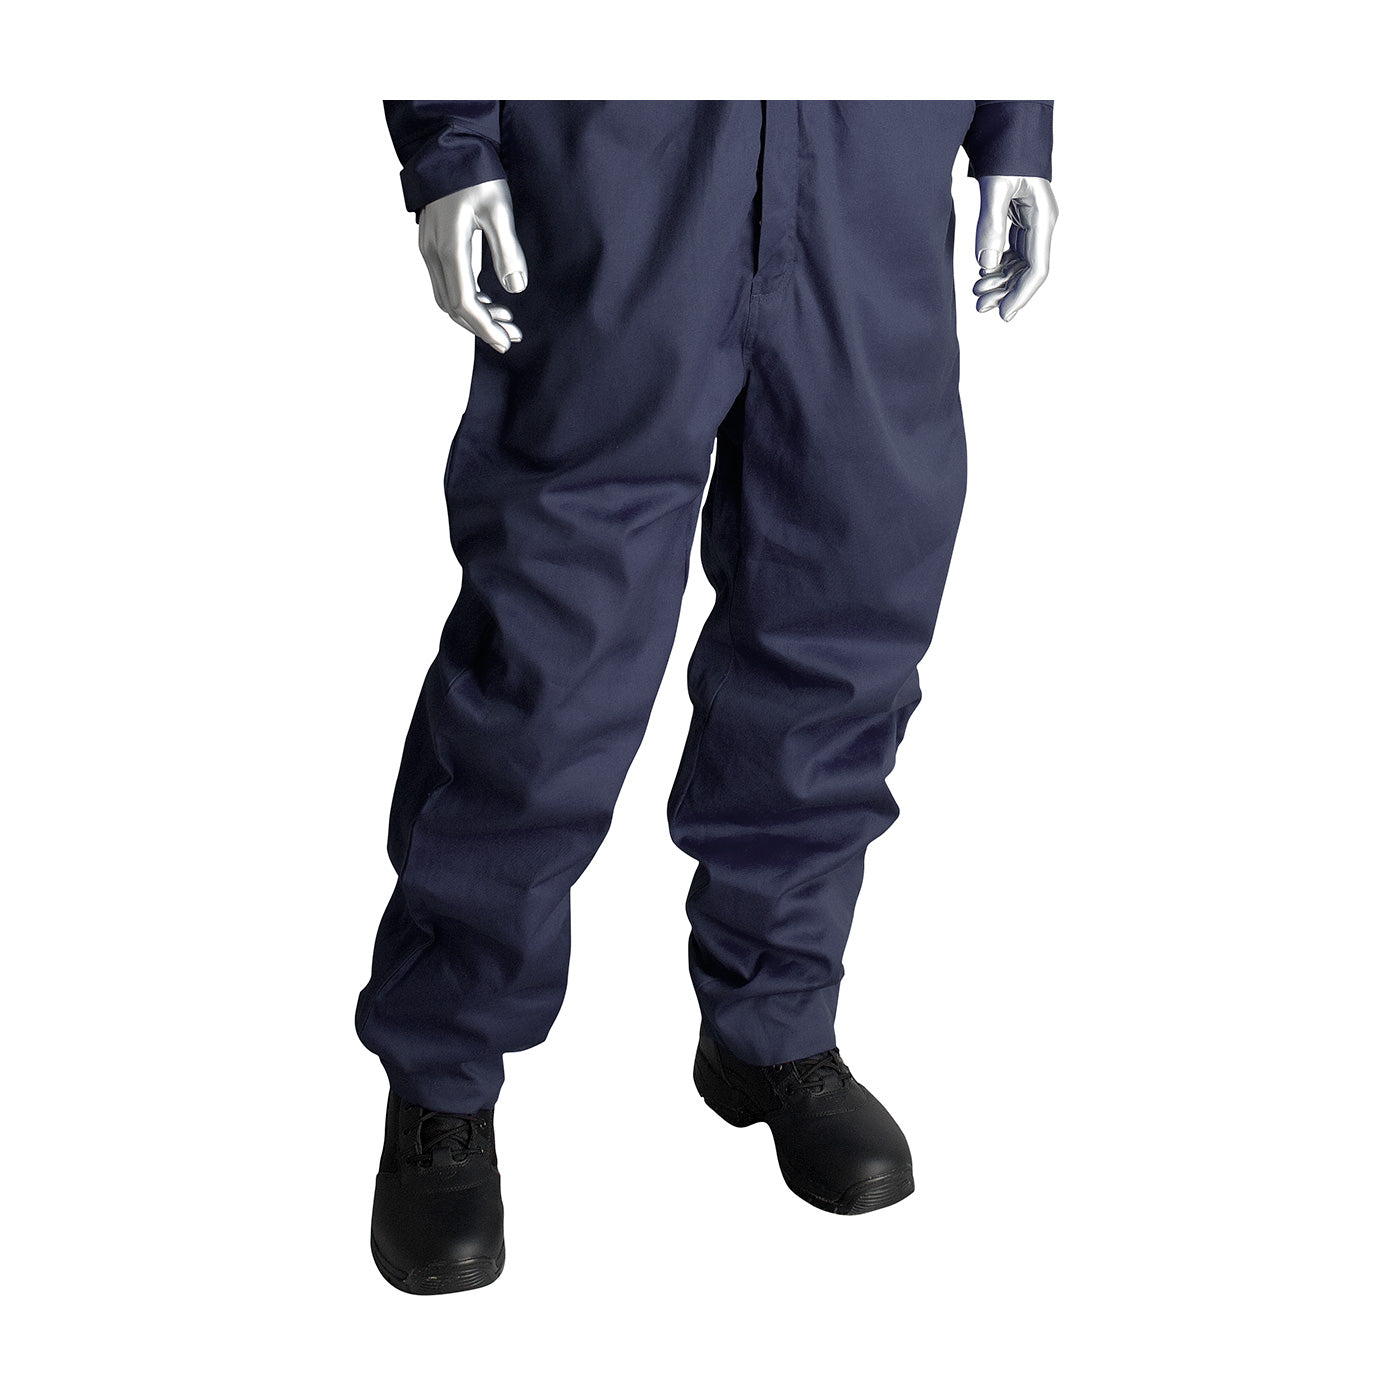 PIP 385-FRSC-NV/XL AR/FR Dual Certified Coverall with Zipper Closure - 9.2 Cal/cm2